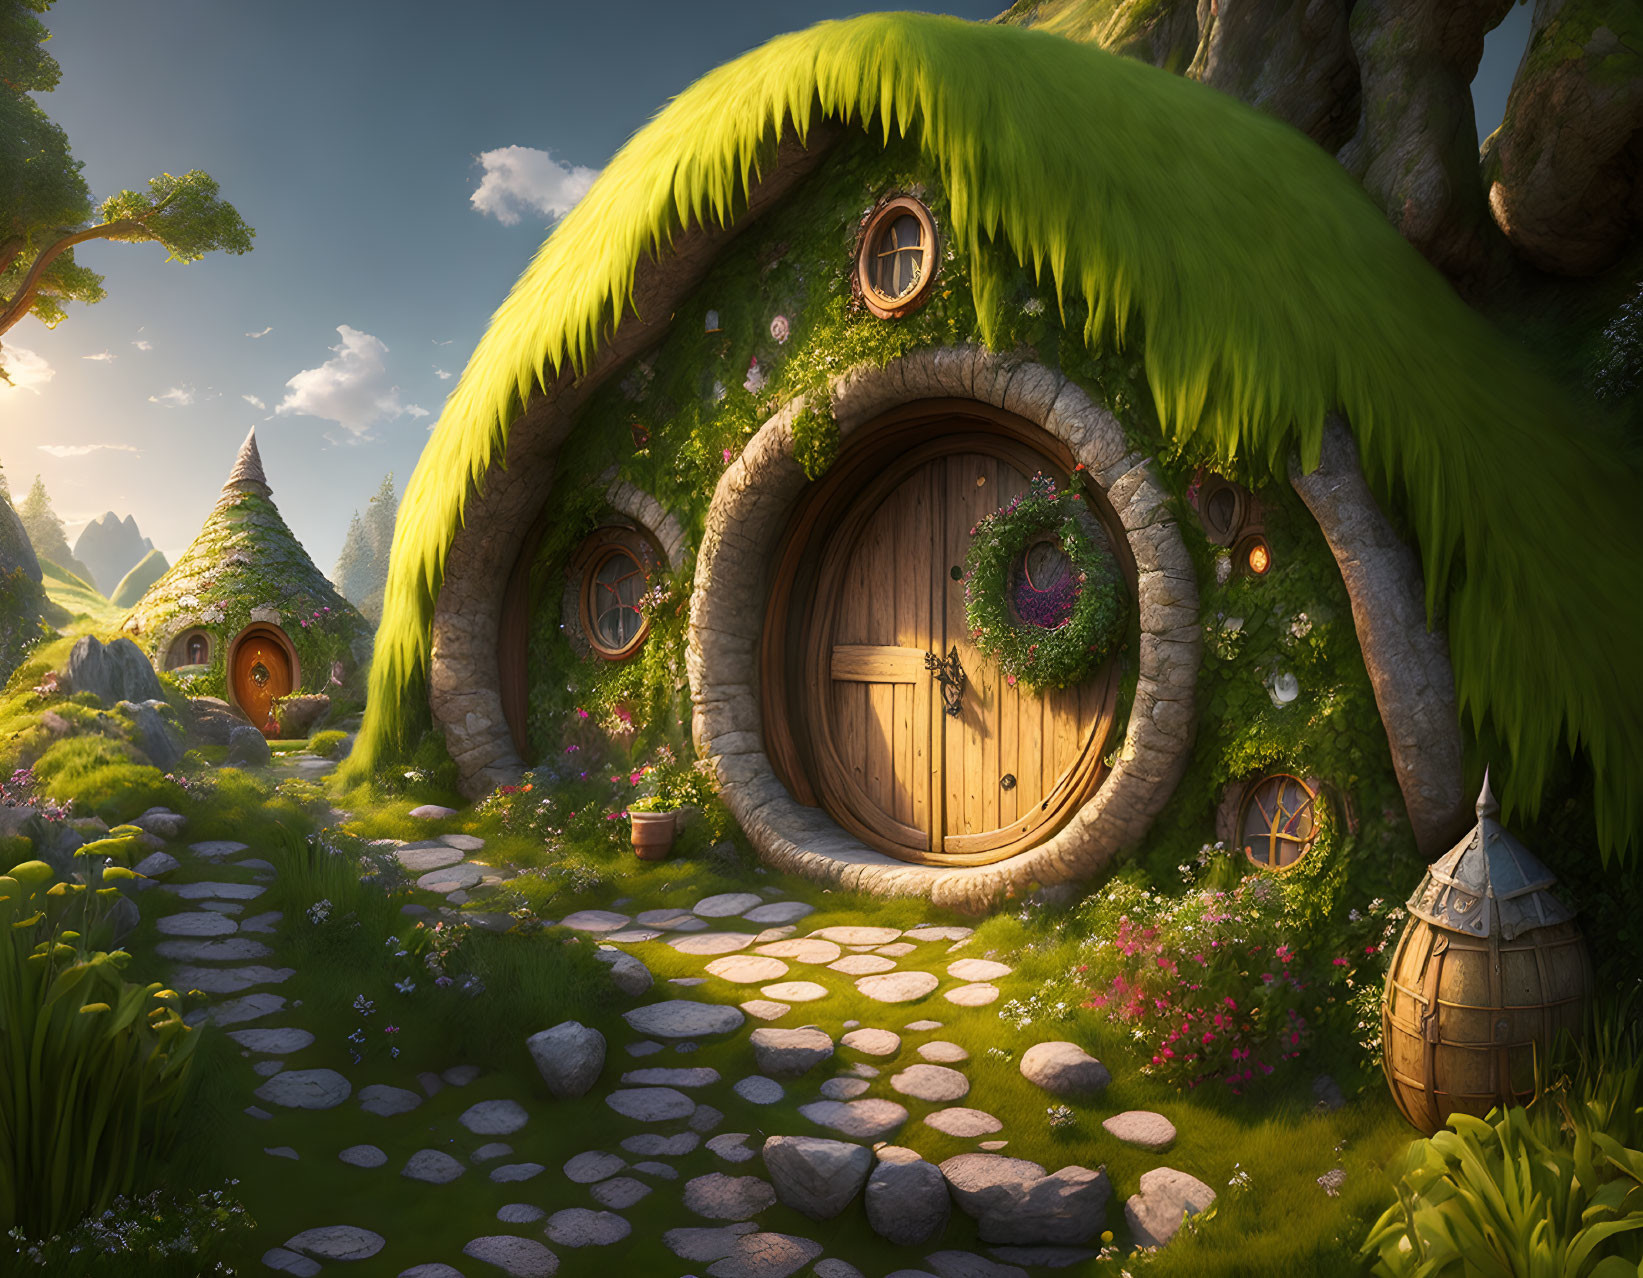 Fantasy hobbit-style house with round door in lush green landscape